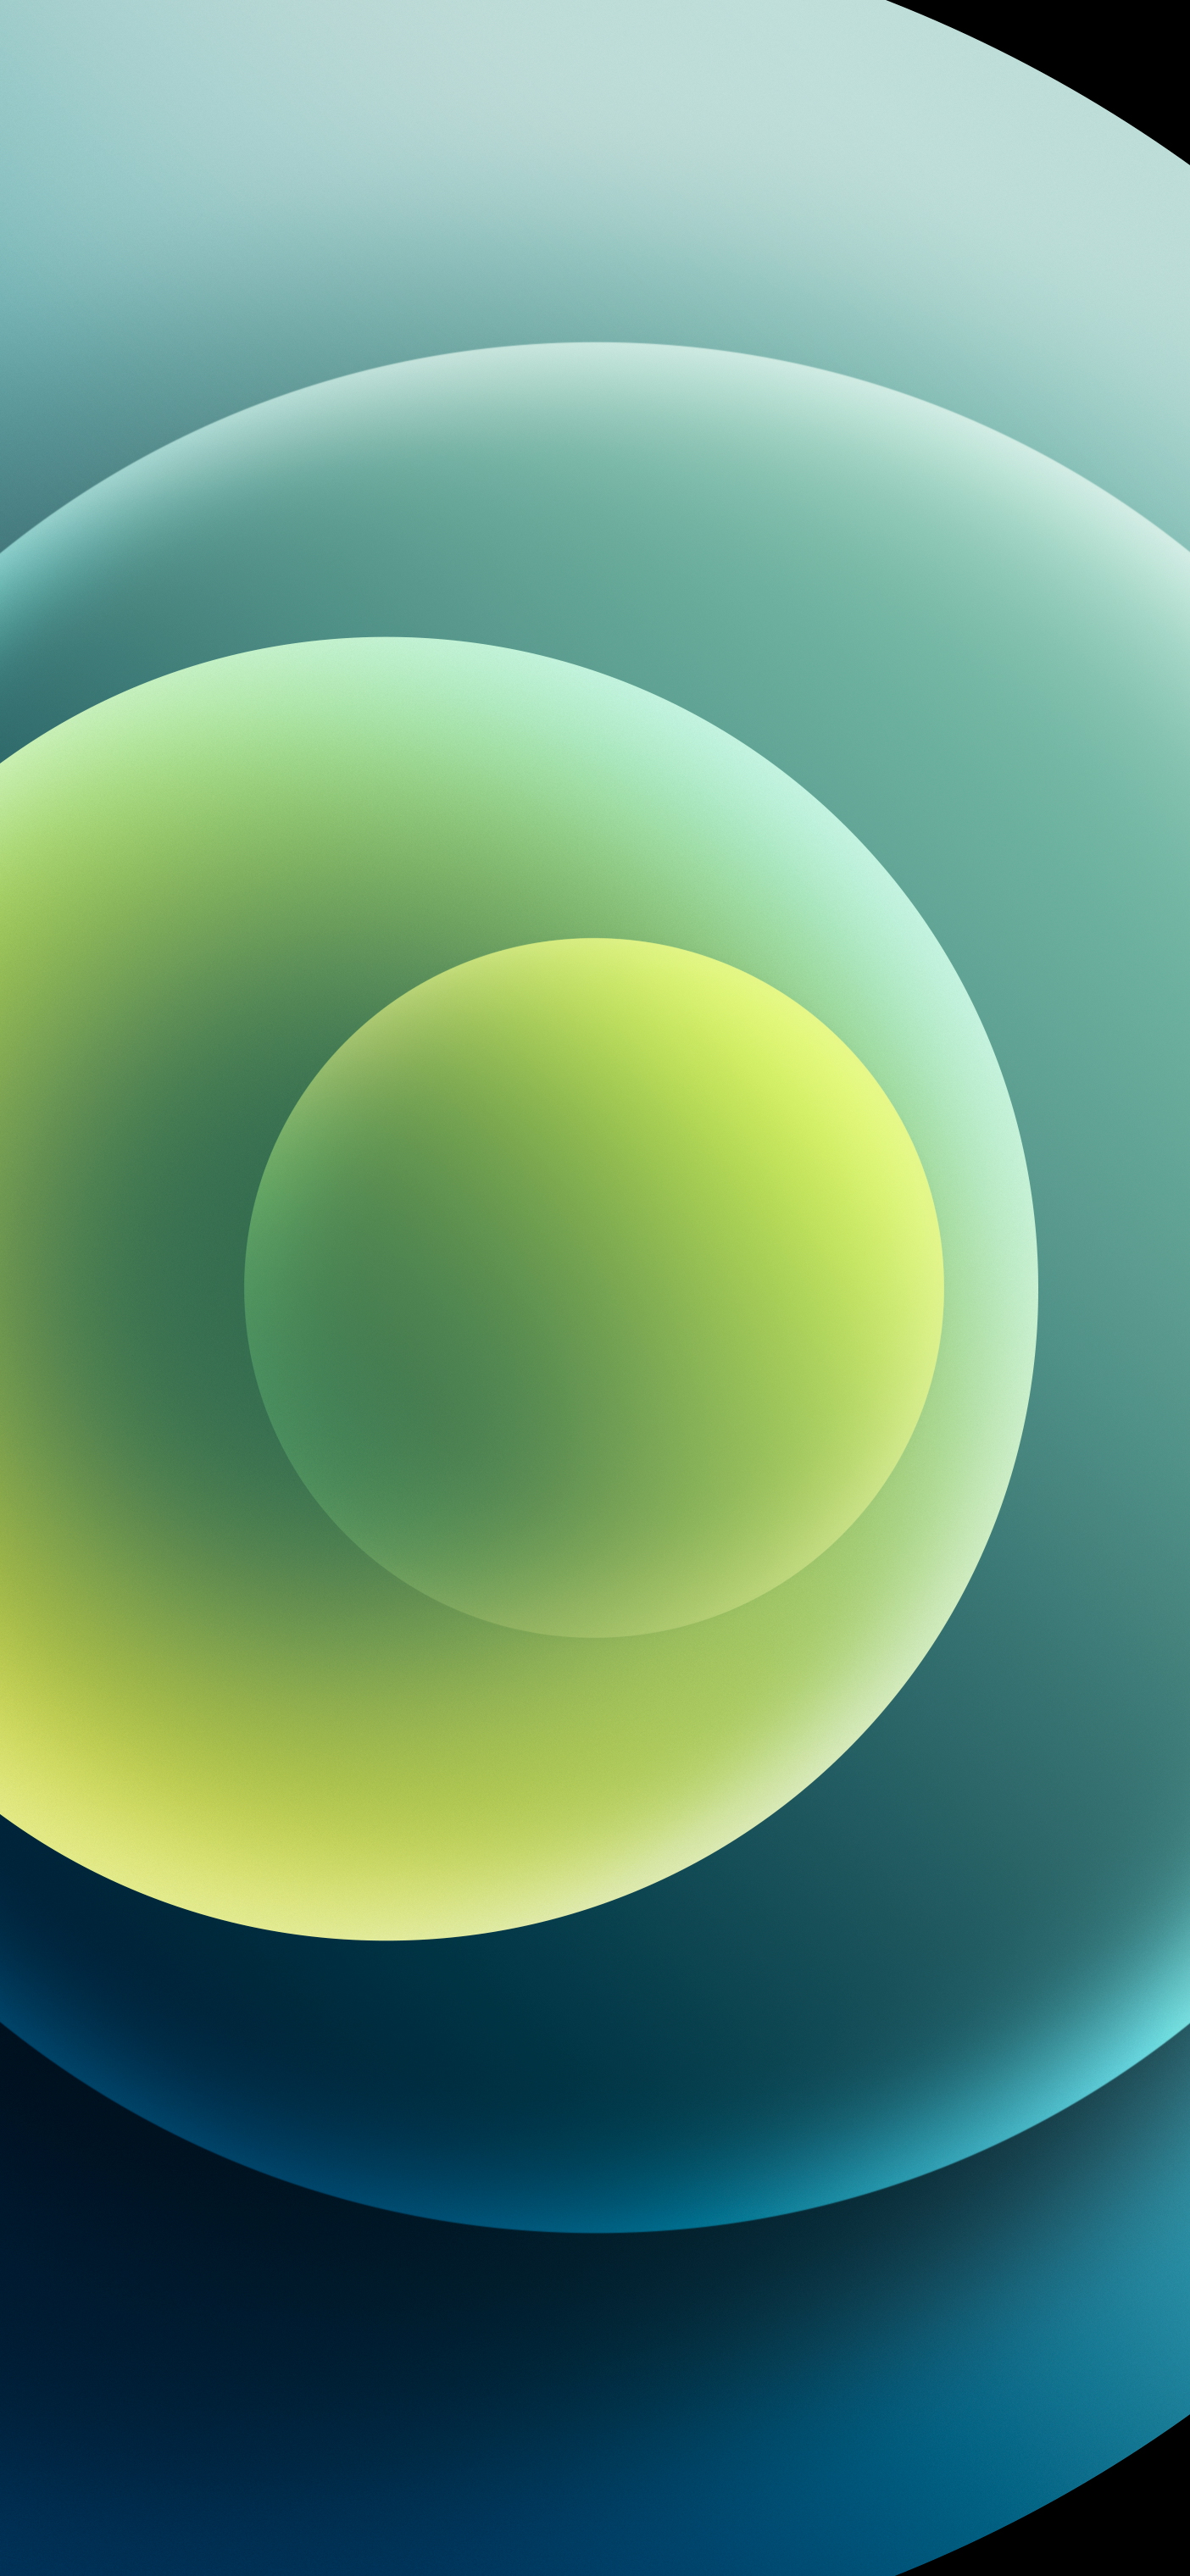 iPhone 12 - Orbs Green (Light) - Stock Wallpaper - Wallpapers Central